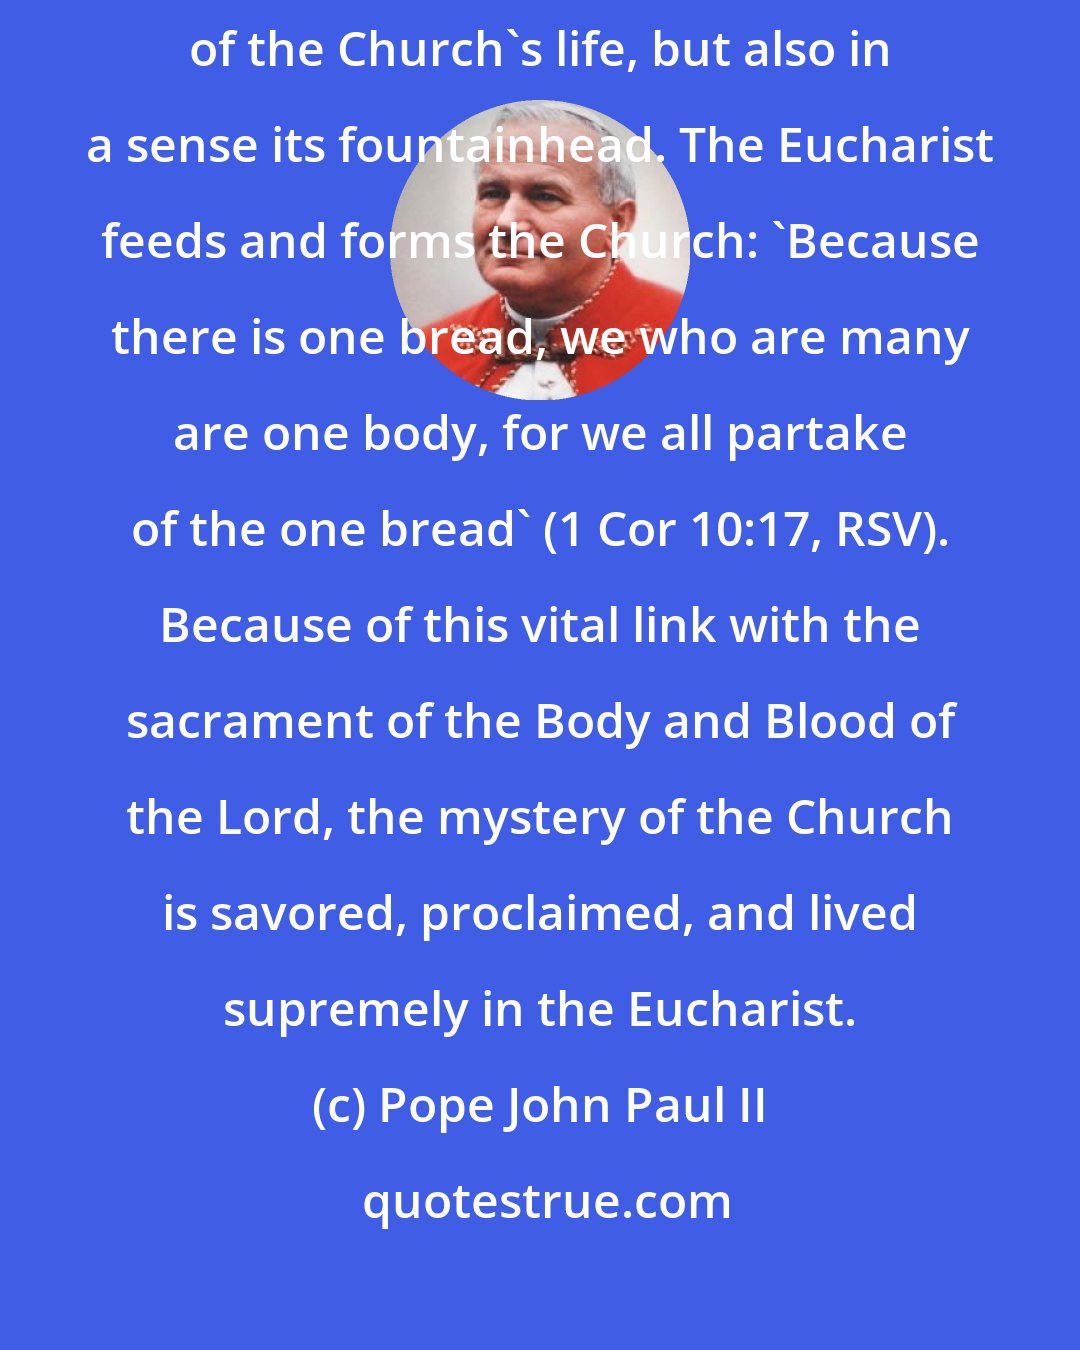 Pope John Paul II: The Eucharist is not only a particularly intense expression of the reality of the Church's life, but also in a sense its fountainhead. The Eucharist feeds and forms the Church: 'Because there is one bread, we who are many are one body, for we all partake of the one bread' (1 Cor 10:17, RSV). Because of this vital link with the sacrament of the Body and Blood of the Lord, the mystery of the Church is savored, proclaimed, and lived supremely in the Eucharist.